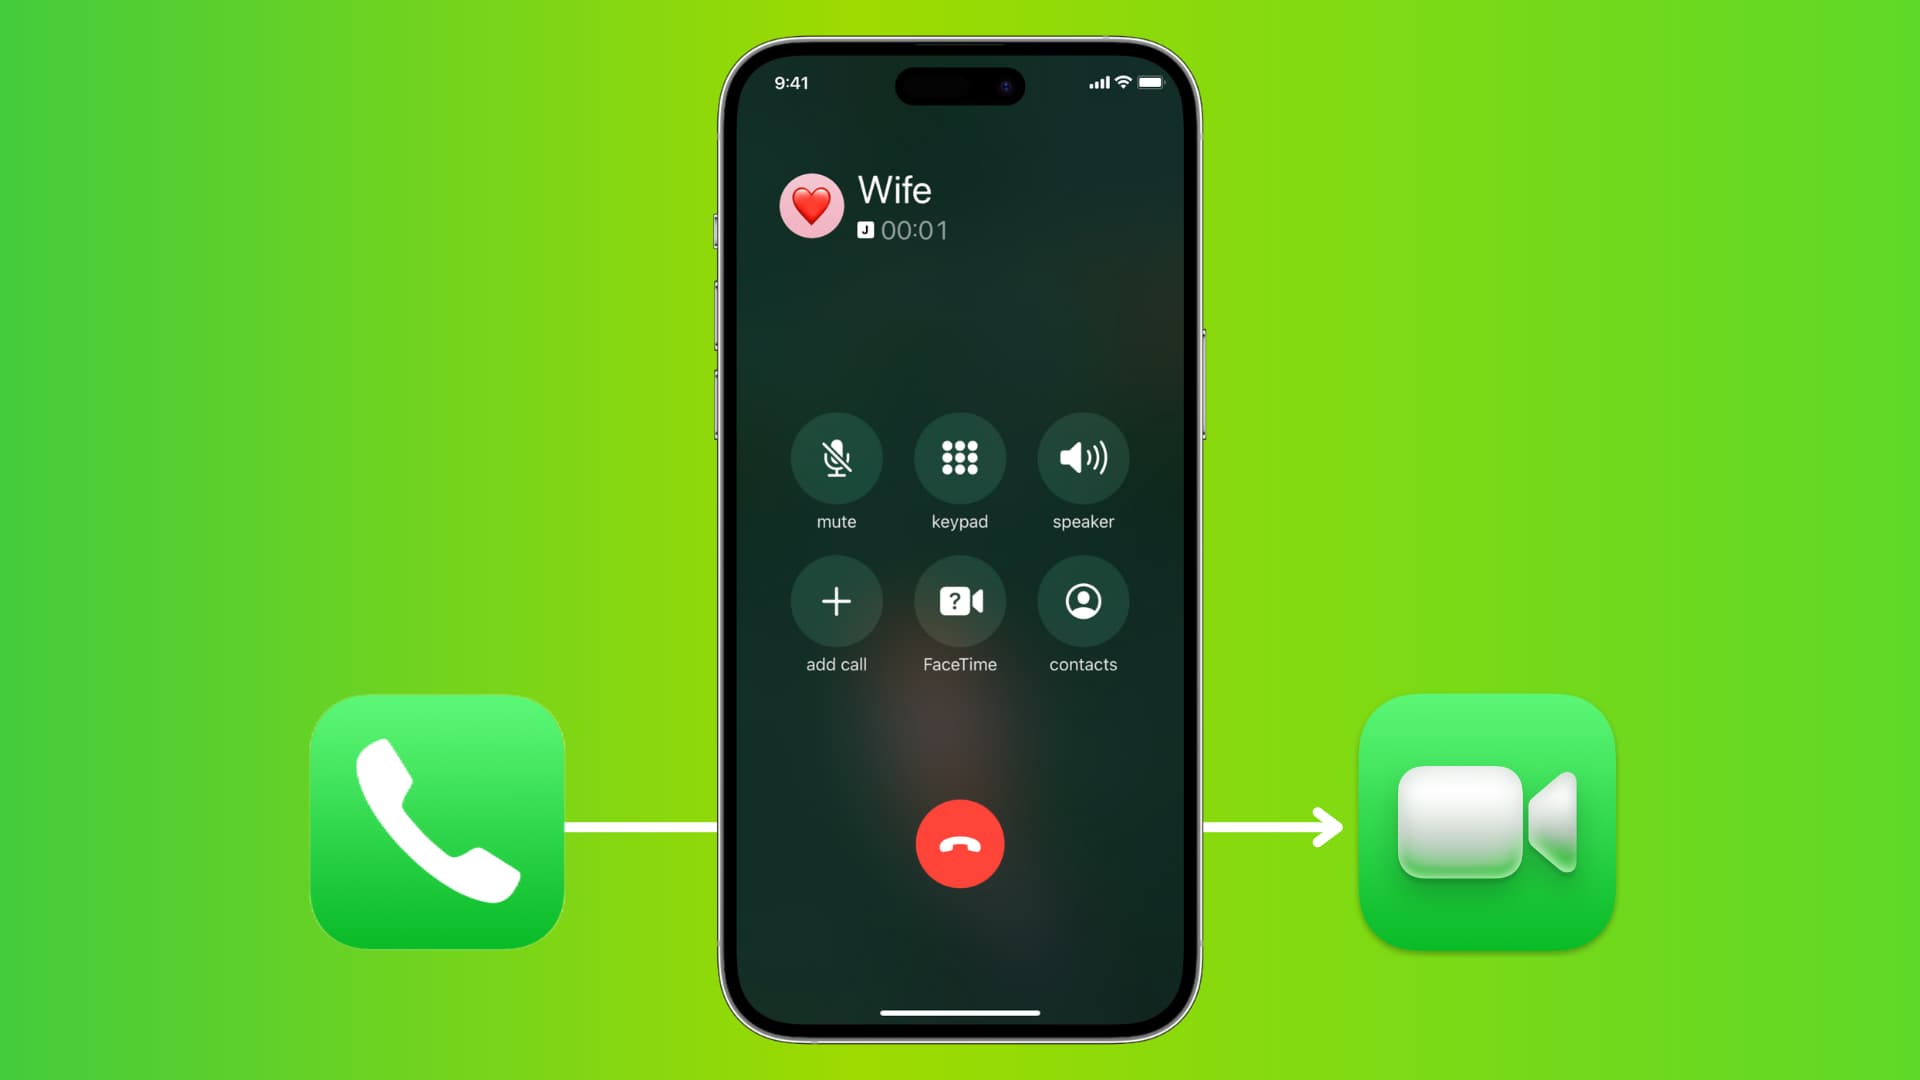 Switch phone call to FaceTime video call on iPhone